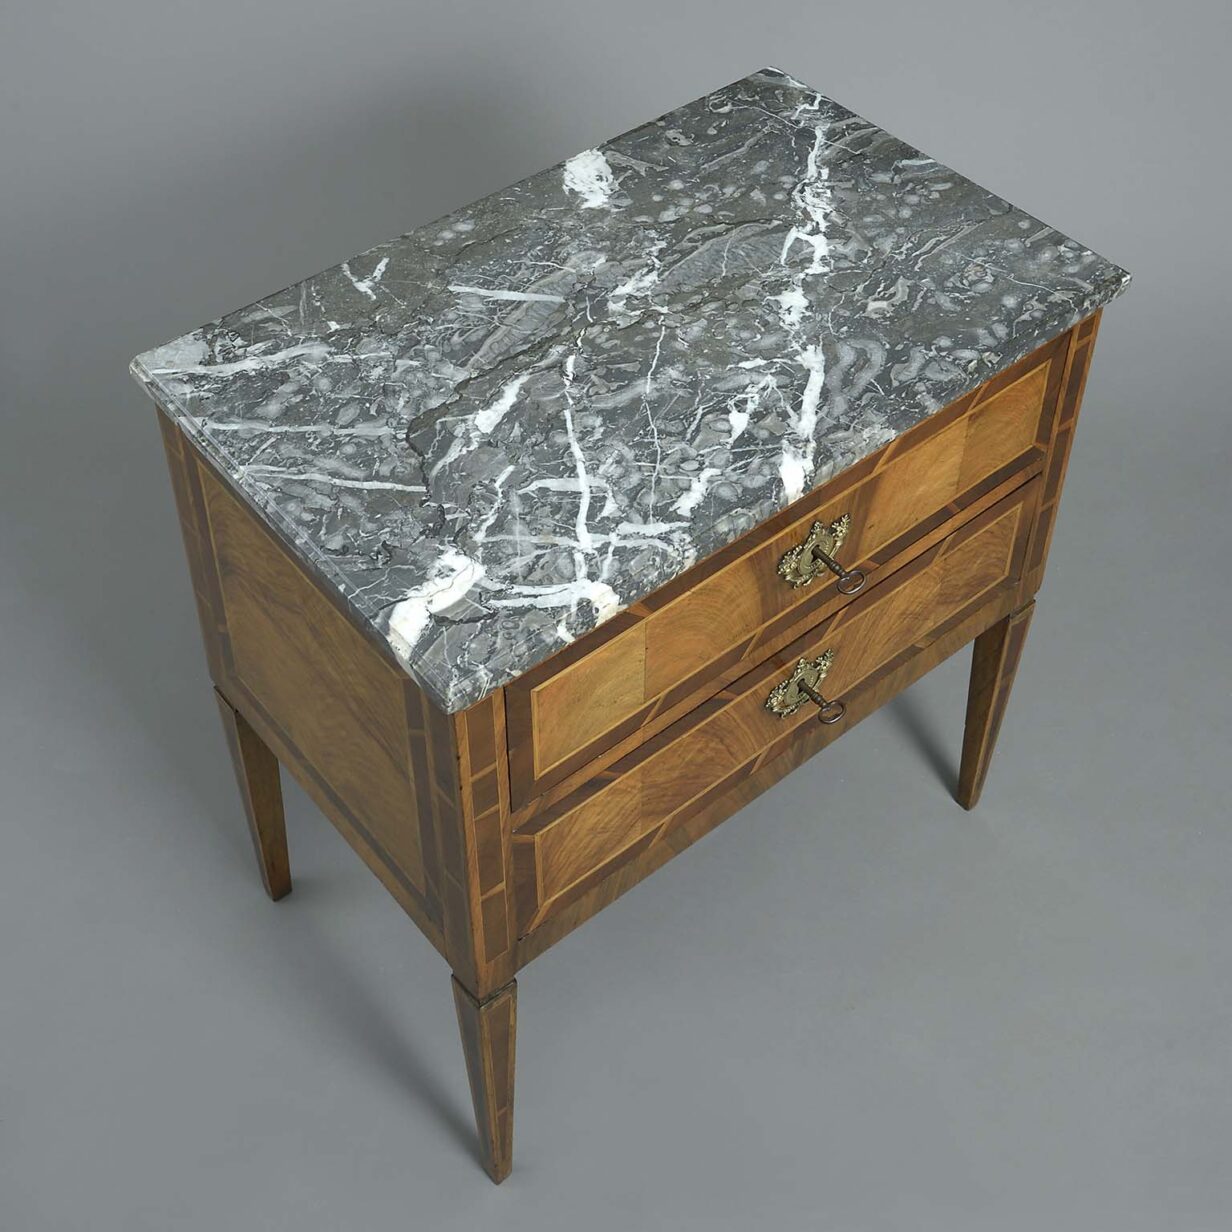 Late 18th century small commode